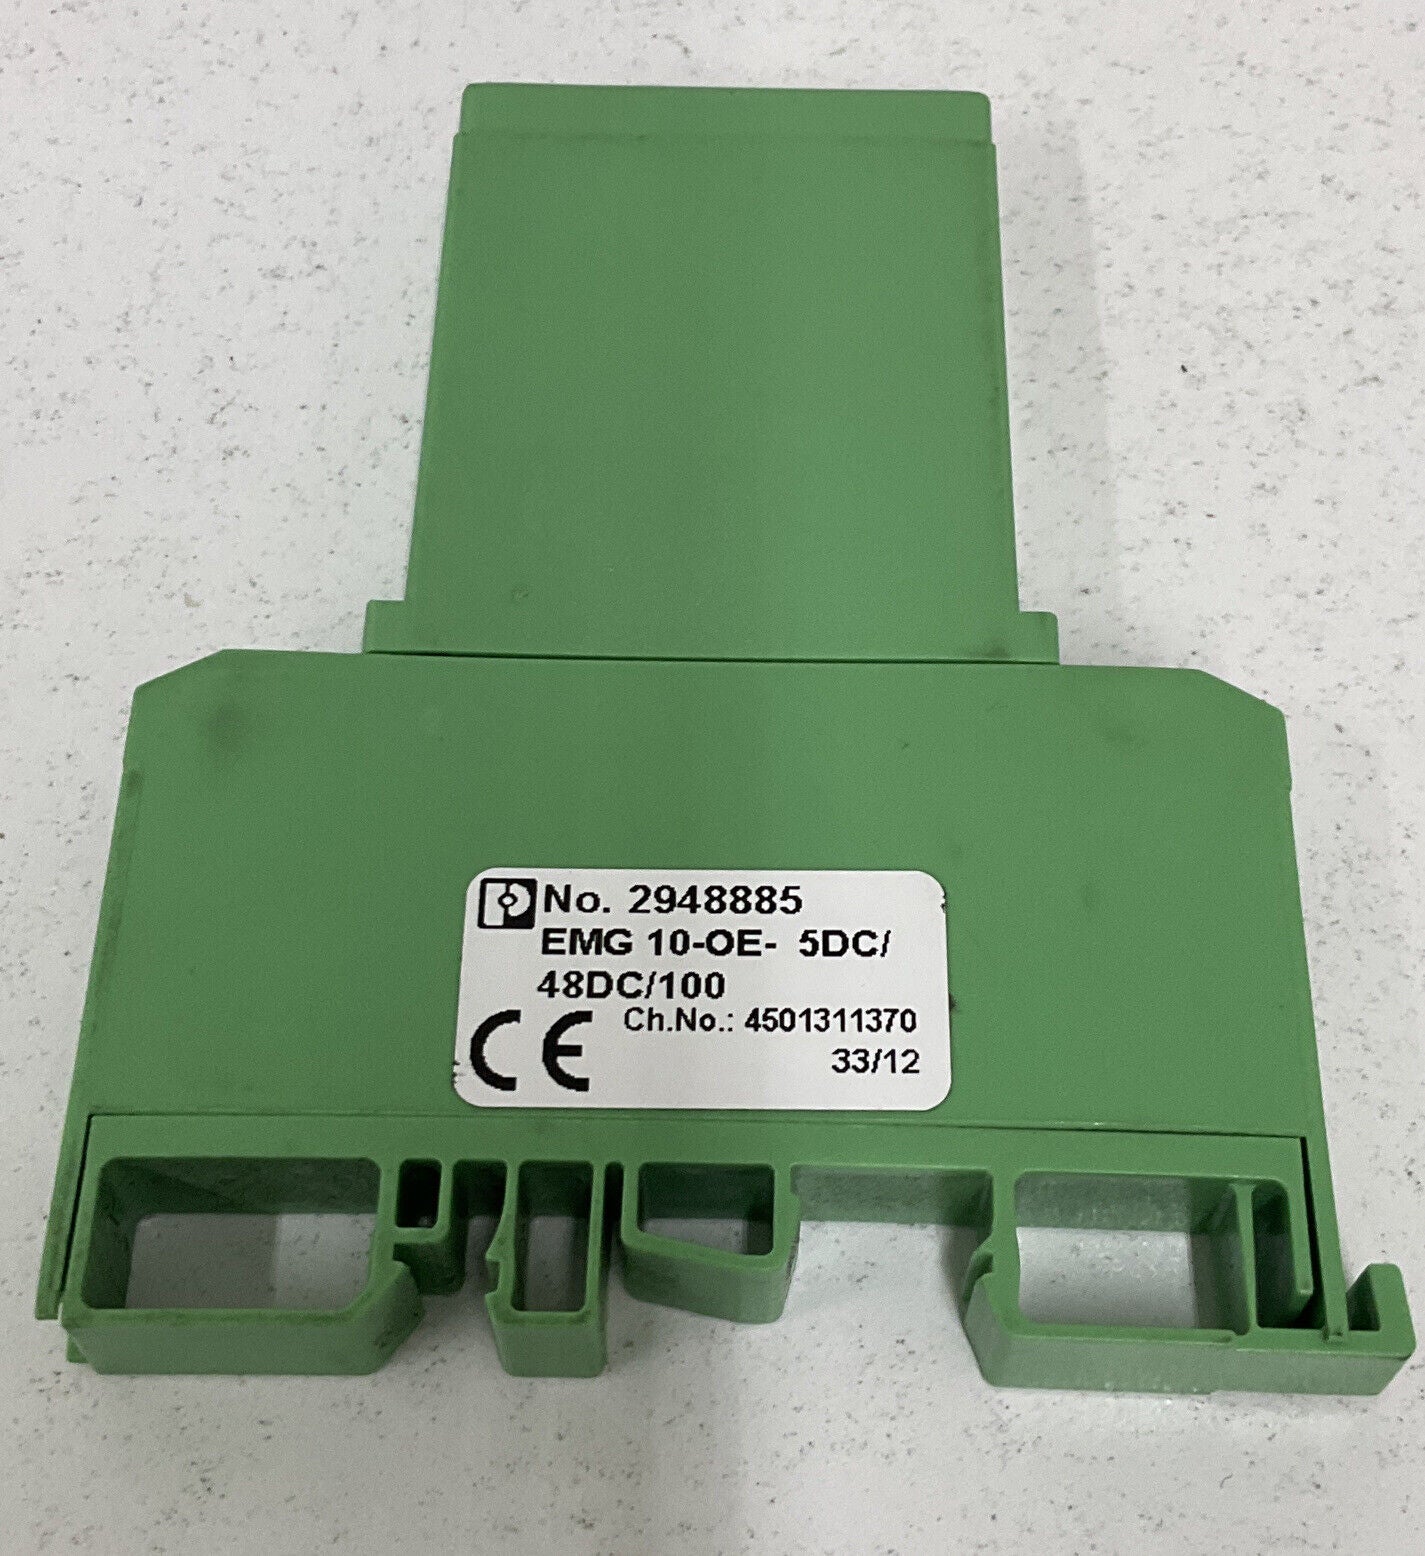 Phoenix Contact 2948885 / EMG 10-OE-5DC/48DC/100 Din Mount Relay (CL197) - 0